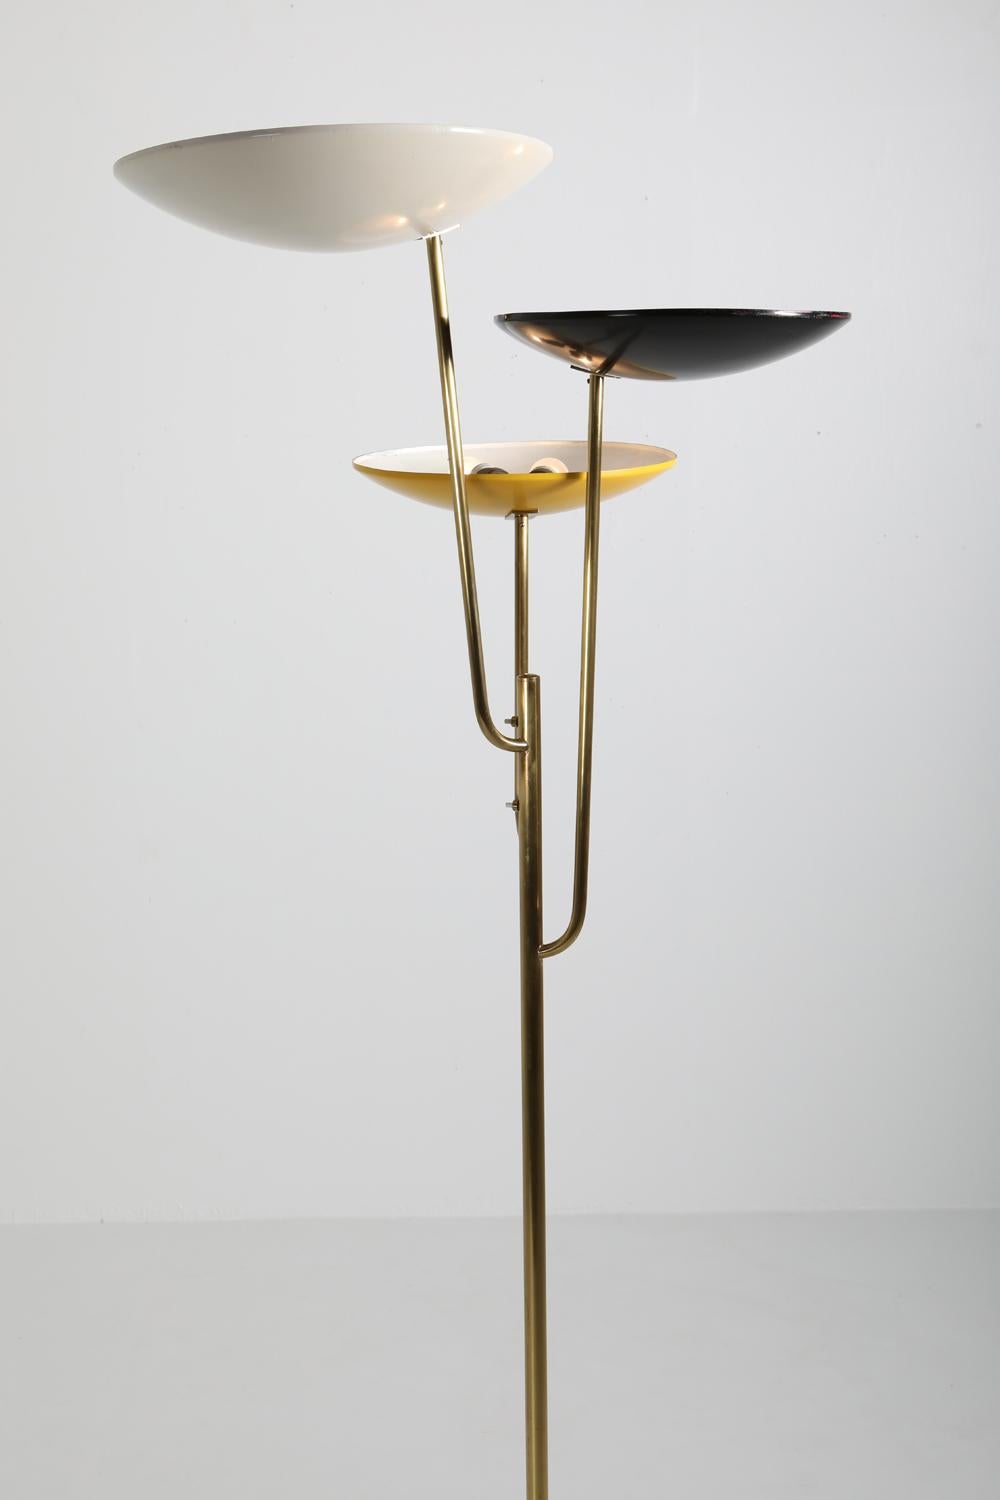 Brass Italian Floor Lamp 1950s Style with a White, Yellow and Black Shade